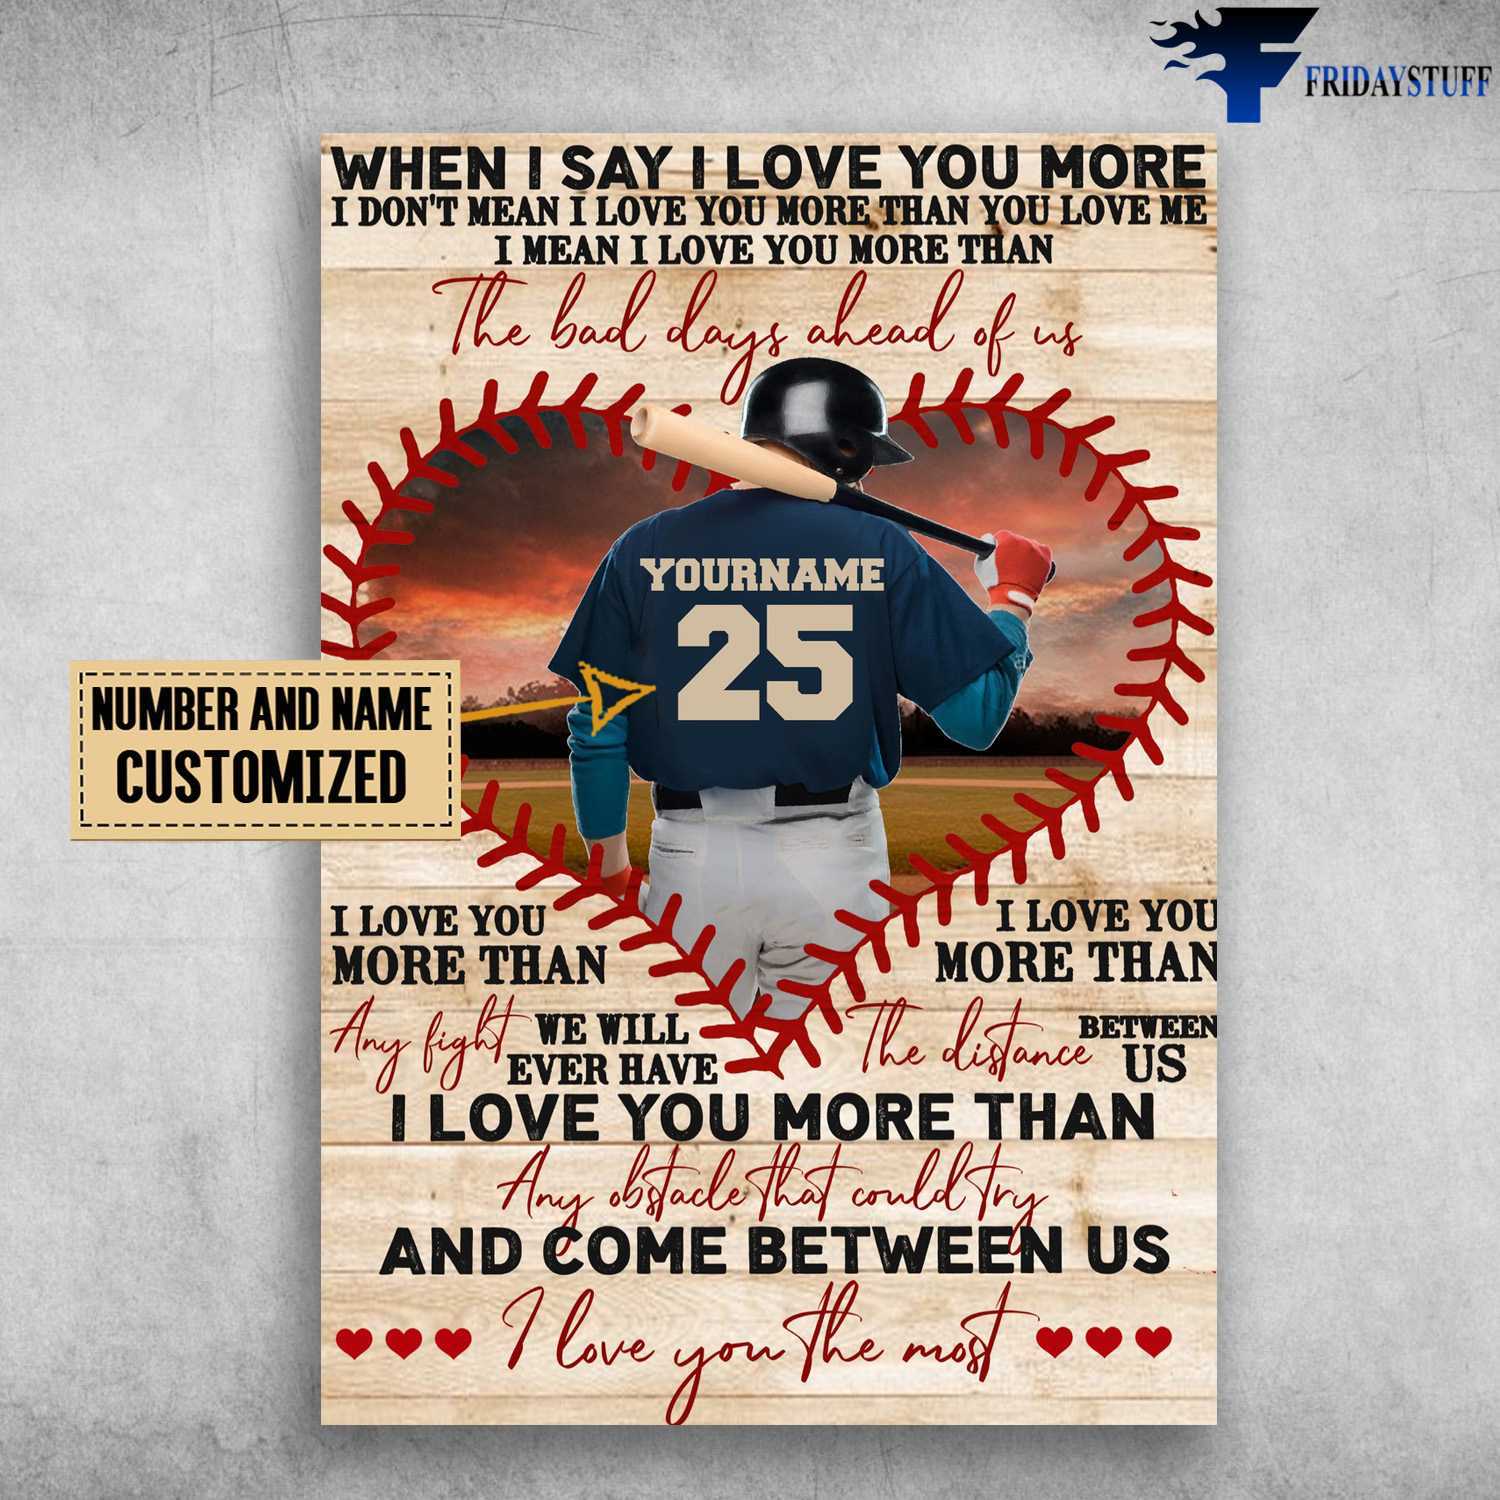 Baseball Poster, Baseball Decor, When I Say I Love You More, I Don't Mean I Love You More Than You Love Me, I Mean I Love You More Than The Bad Days A Head Of Us